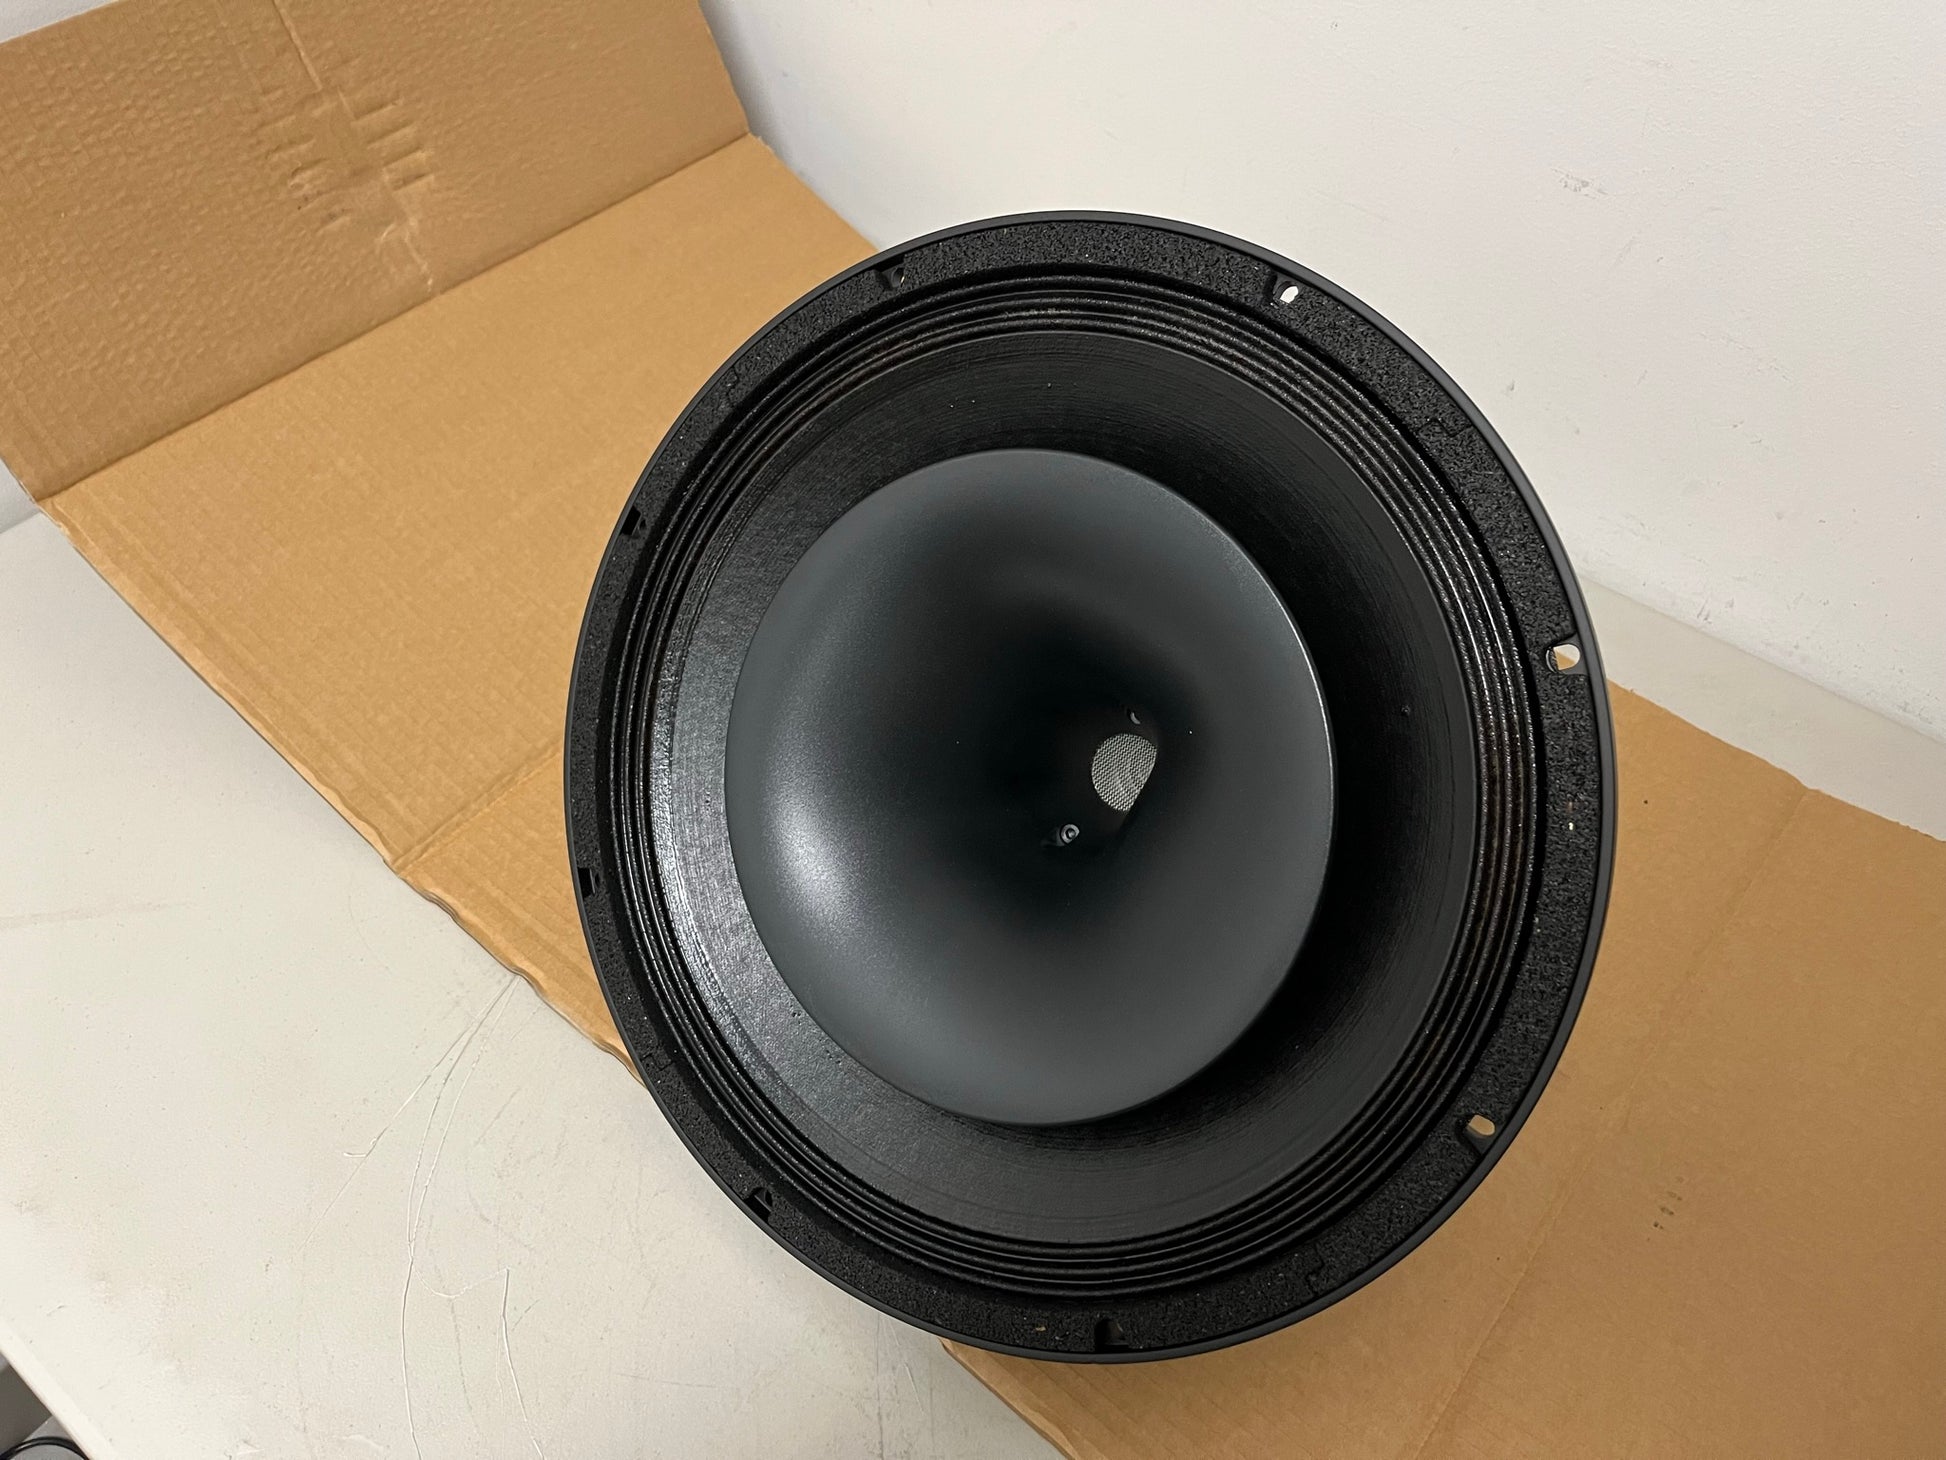 B&C 15HCX76 Speaker , 800W , 15" , 8 ohm  Black, We Sell Professional Audio Equipment. Audio Systems, Amplifiers, Consoles, Mixers, Electronics, Entertainment, Live Sound